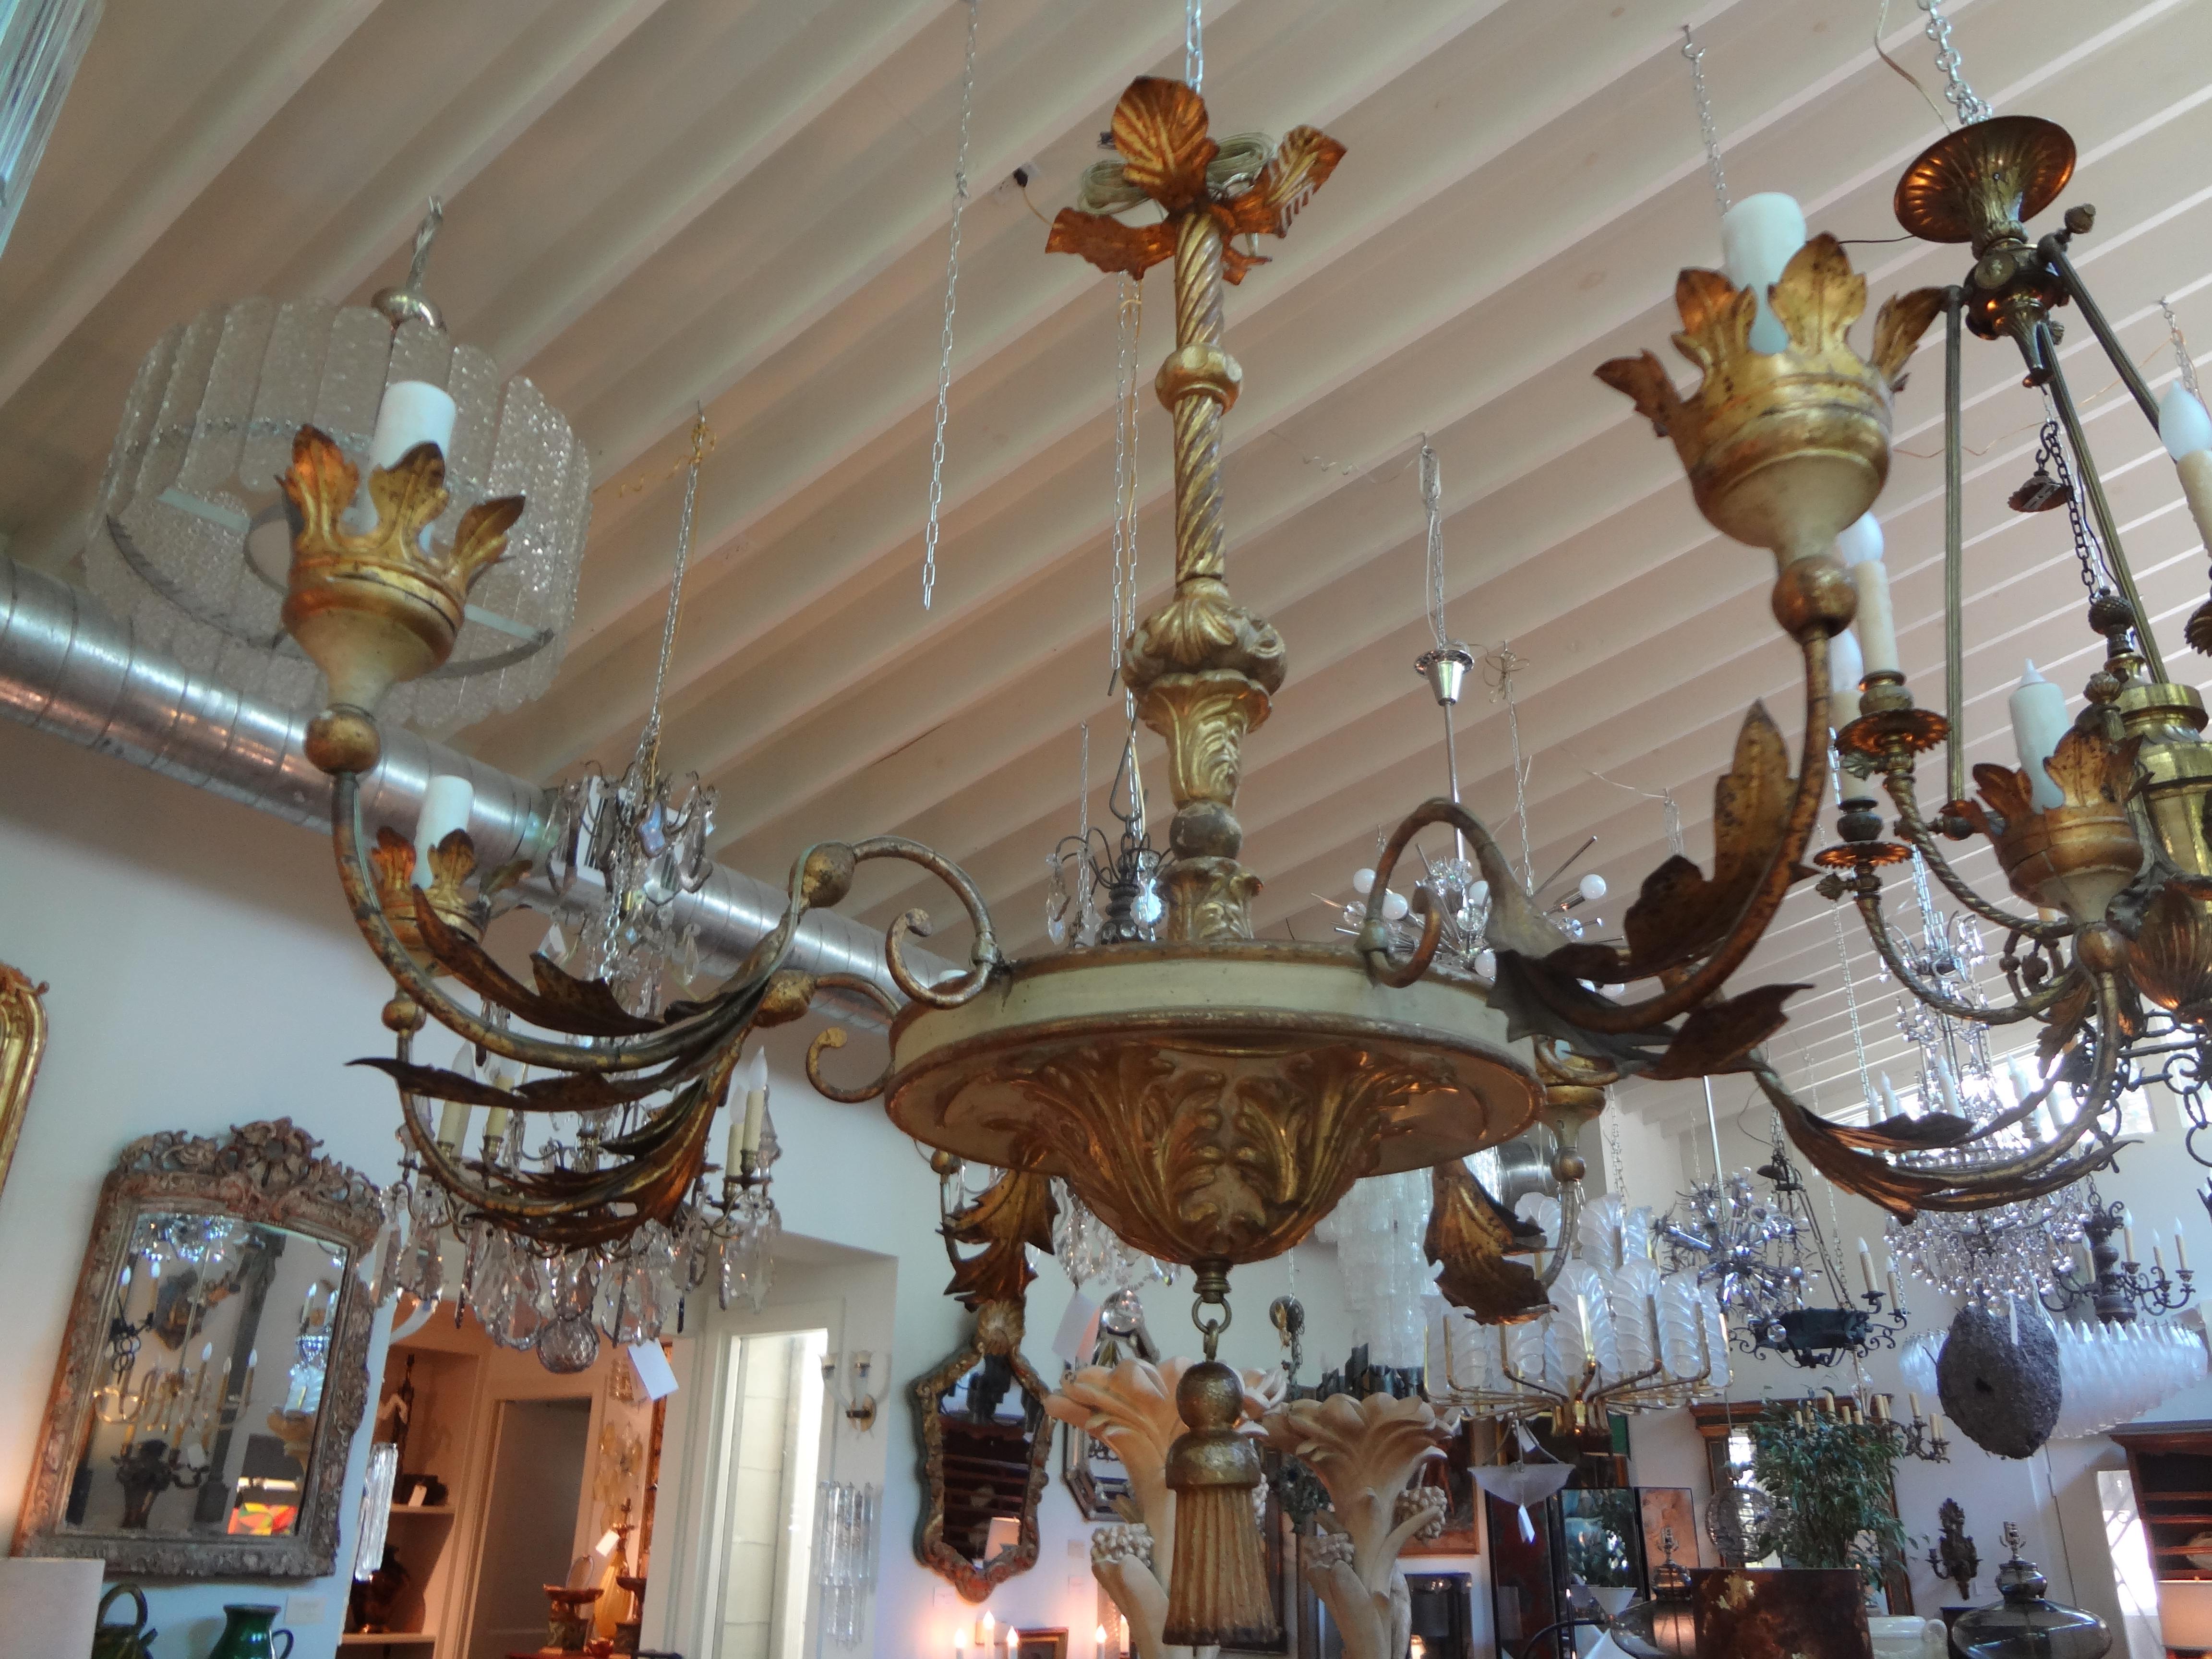 Stunning large 18th century Italian Genovese six-light painted and giltwood chandelier. This elegant Northern Italian giltwood chandelier has six elegantly forged iron arms and has been newly electrified. This lovely versatile chandelier would work